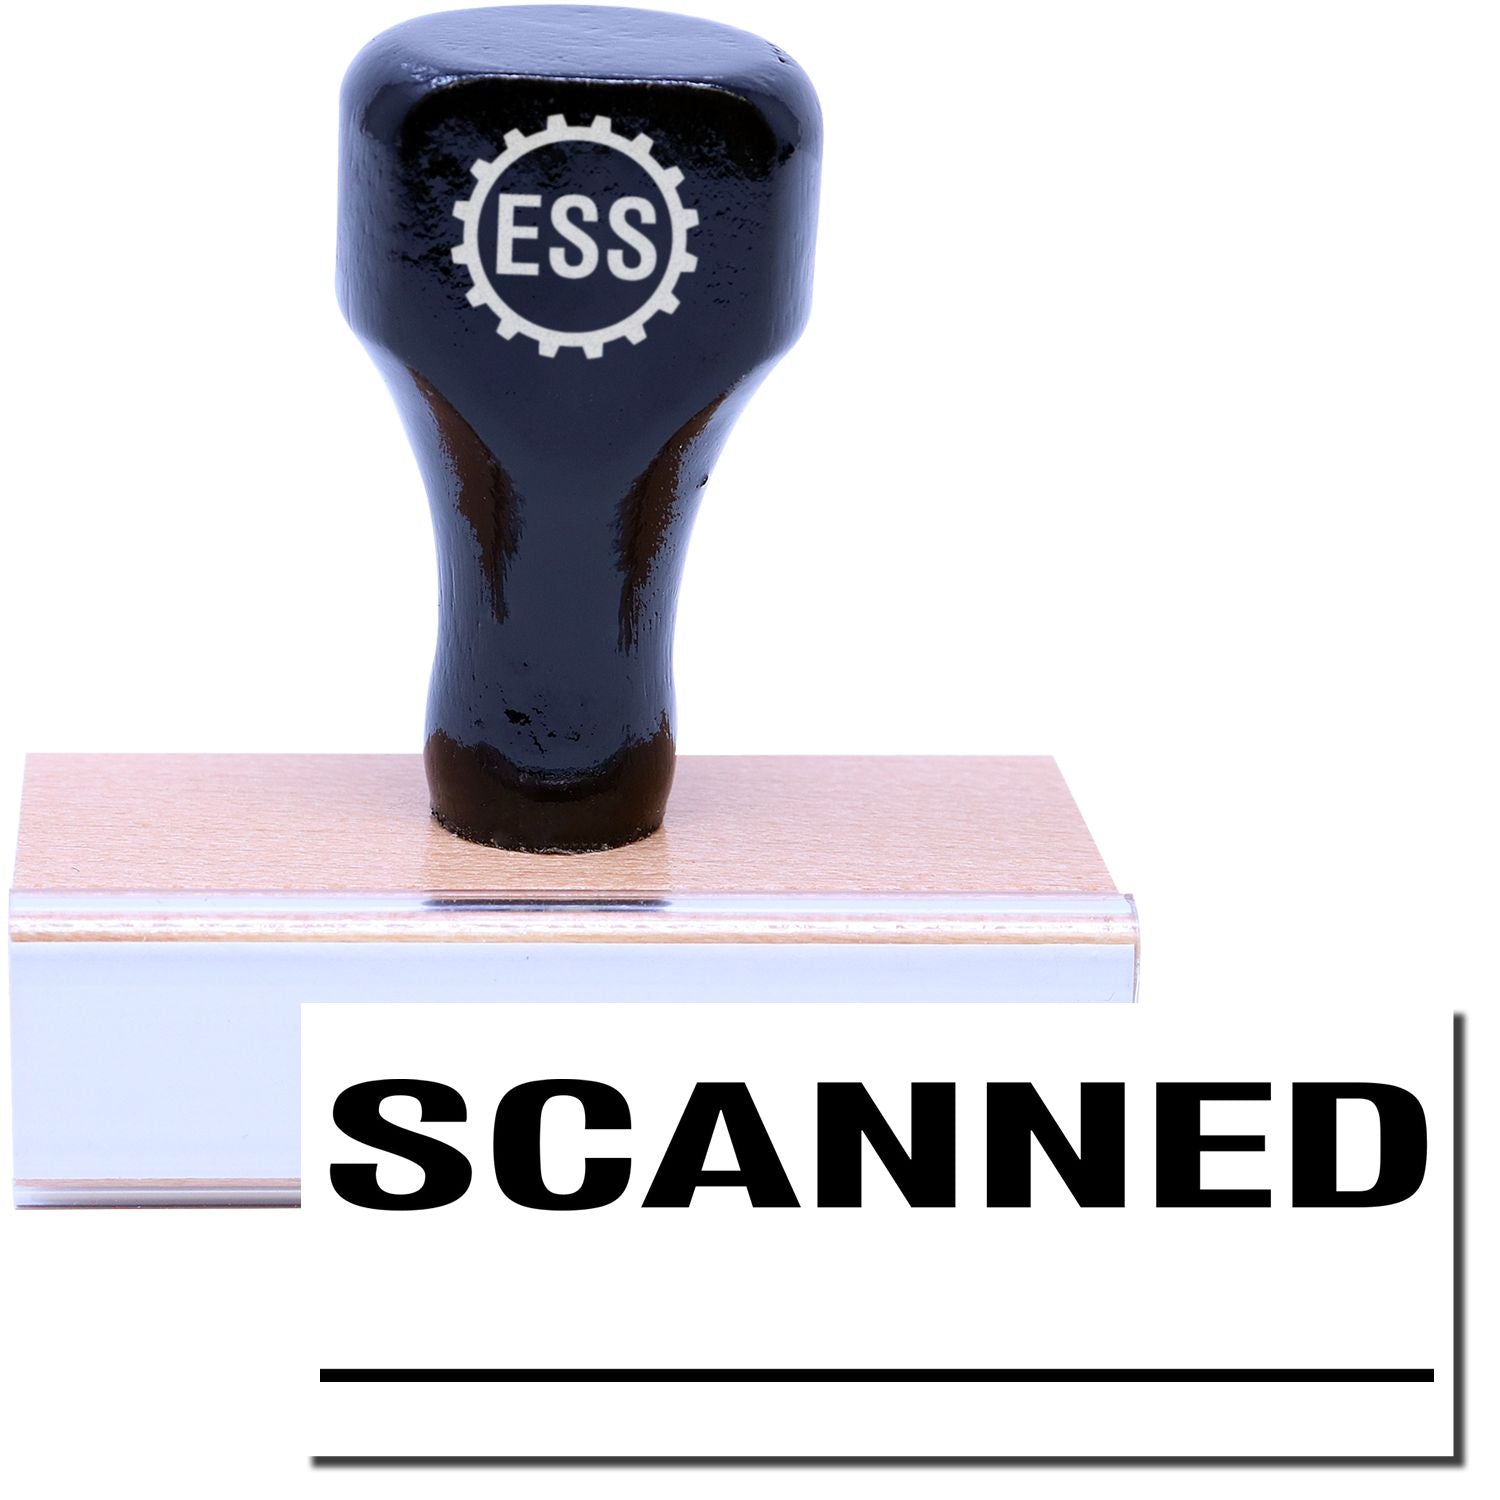 A stock office rubber stamp with a stamped image showing how the text "SCANNED" in a large font with a line underneath the text is displayed after stamping.